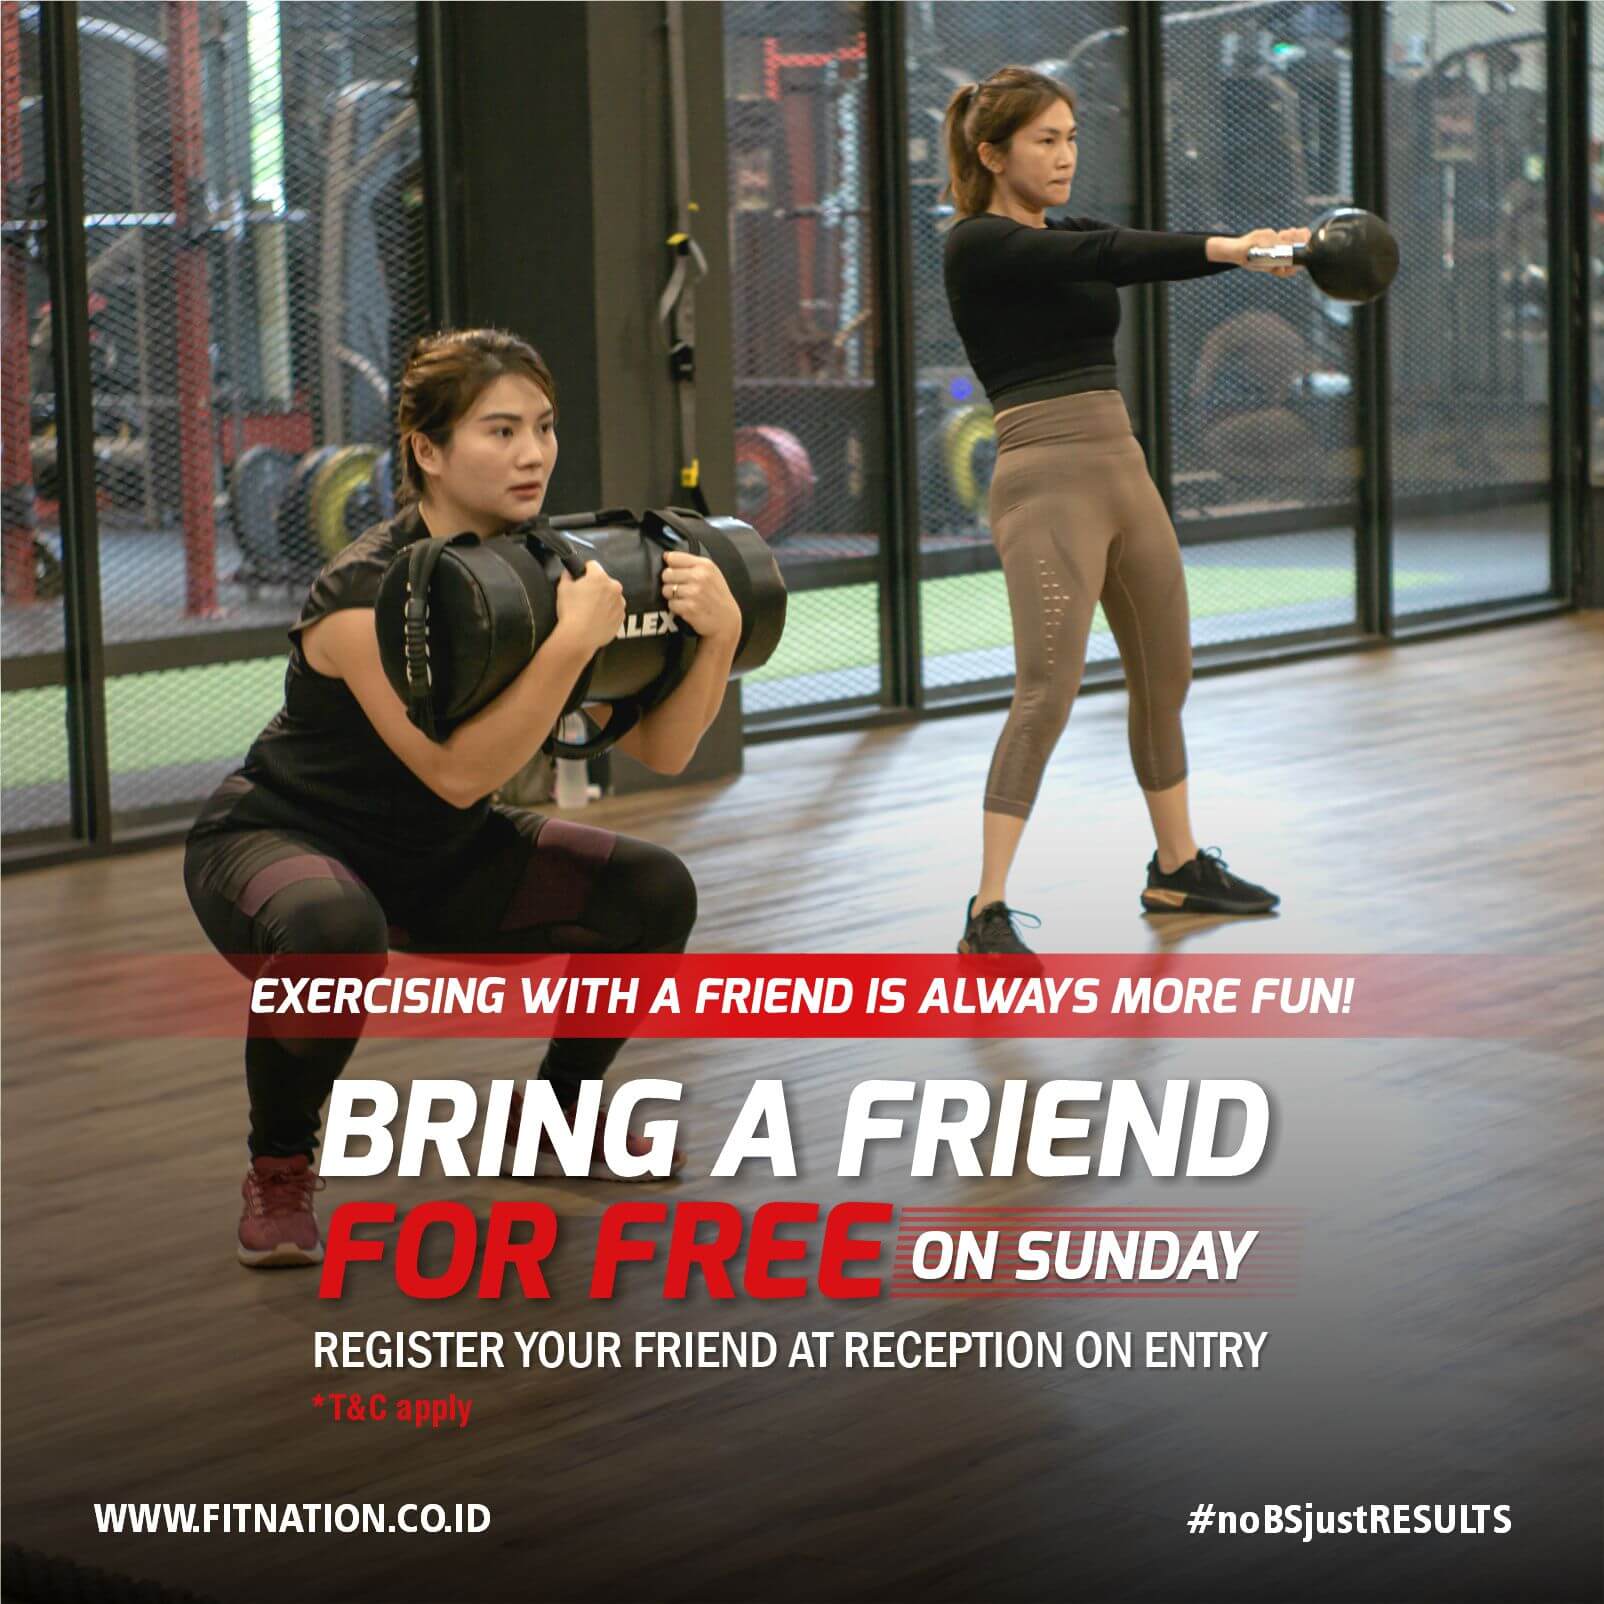 BRING A FRIEND FOR FREE